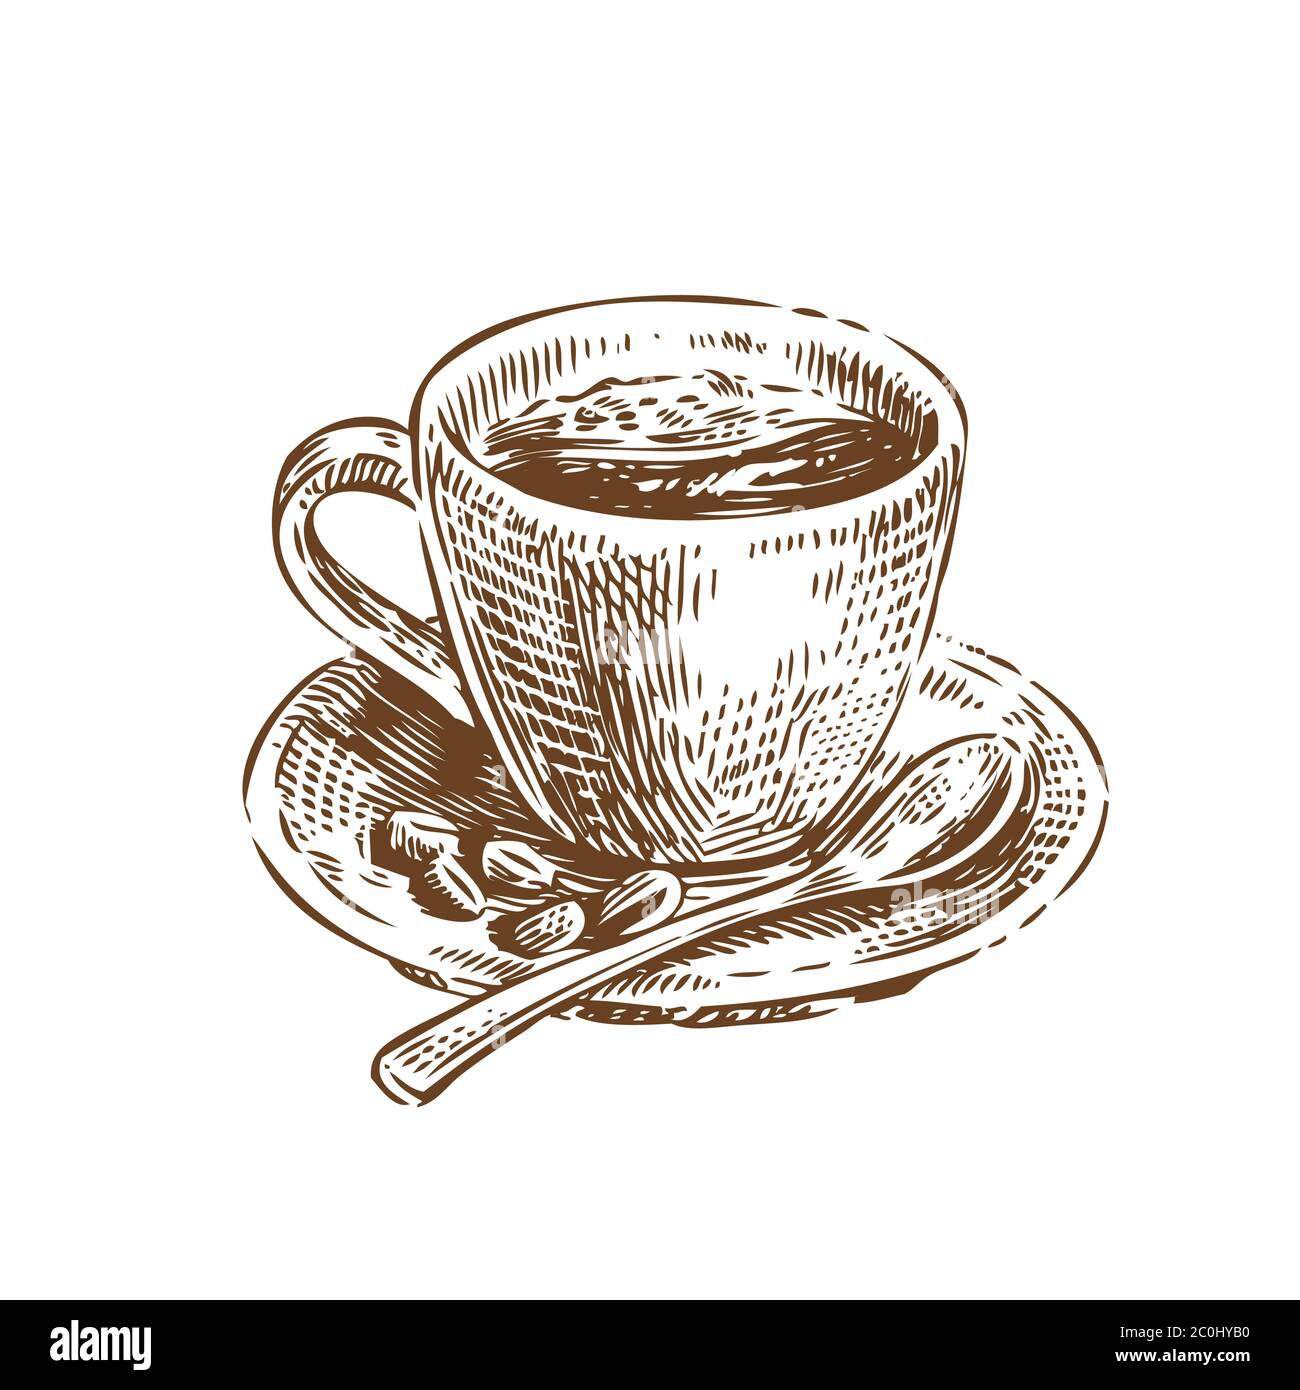 Cup of coffee sketch. Vintage vector illustration. Menu design for cafe and restaurant Stock Vector